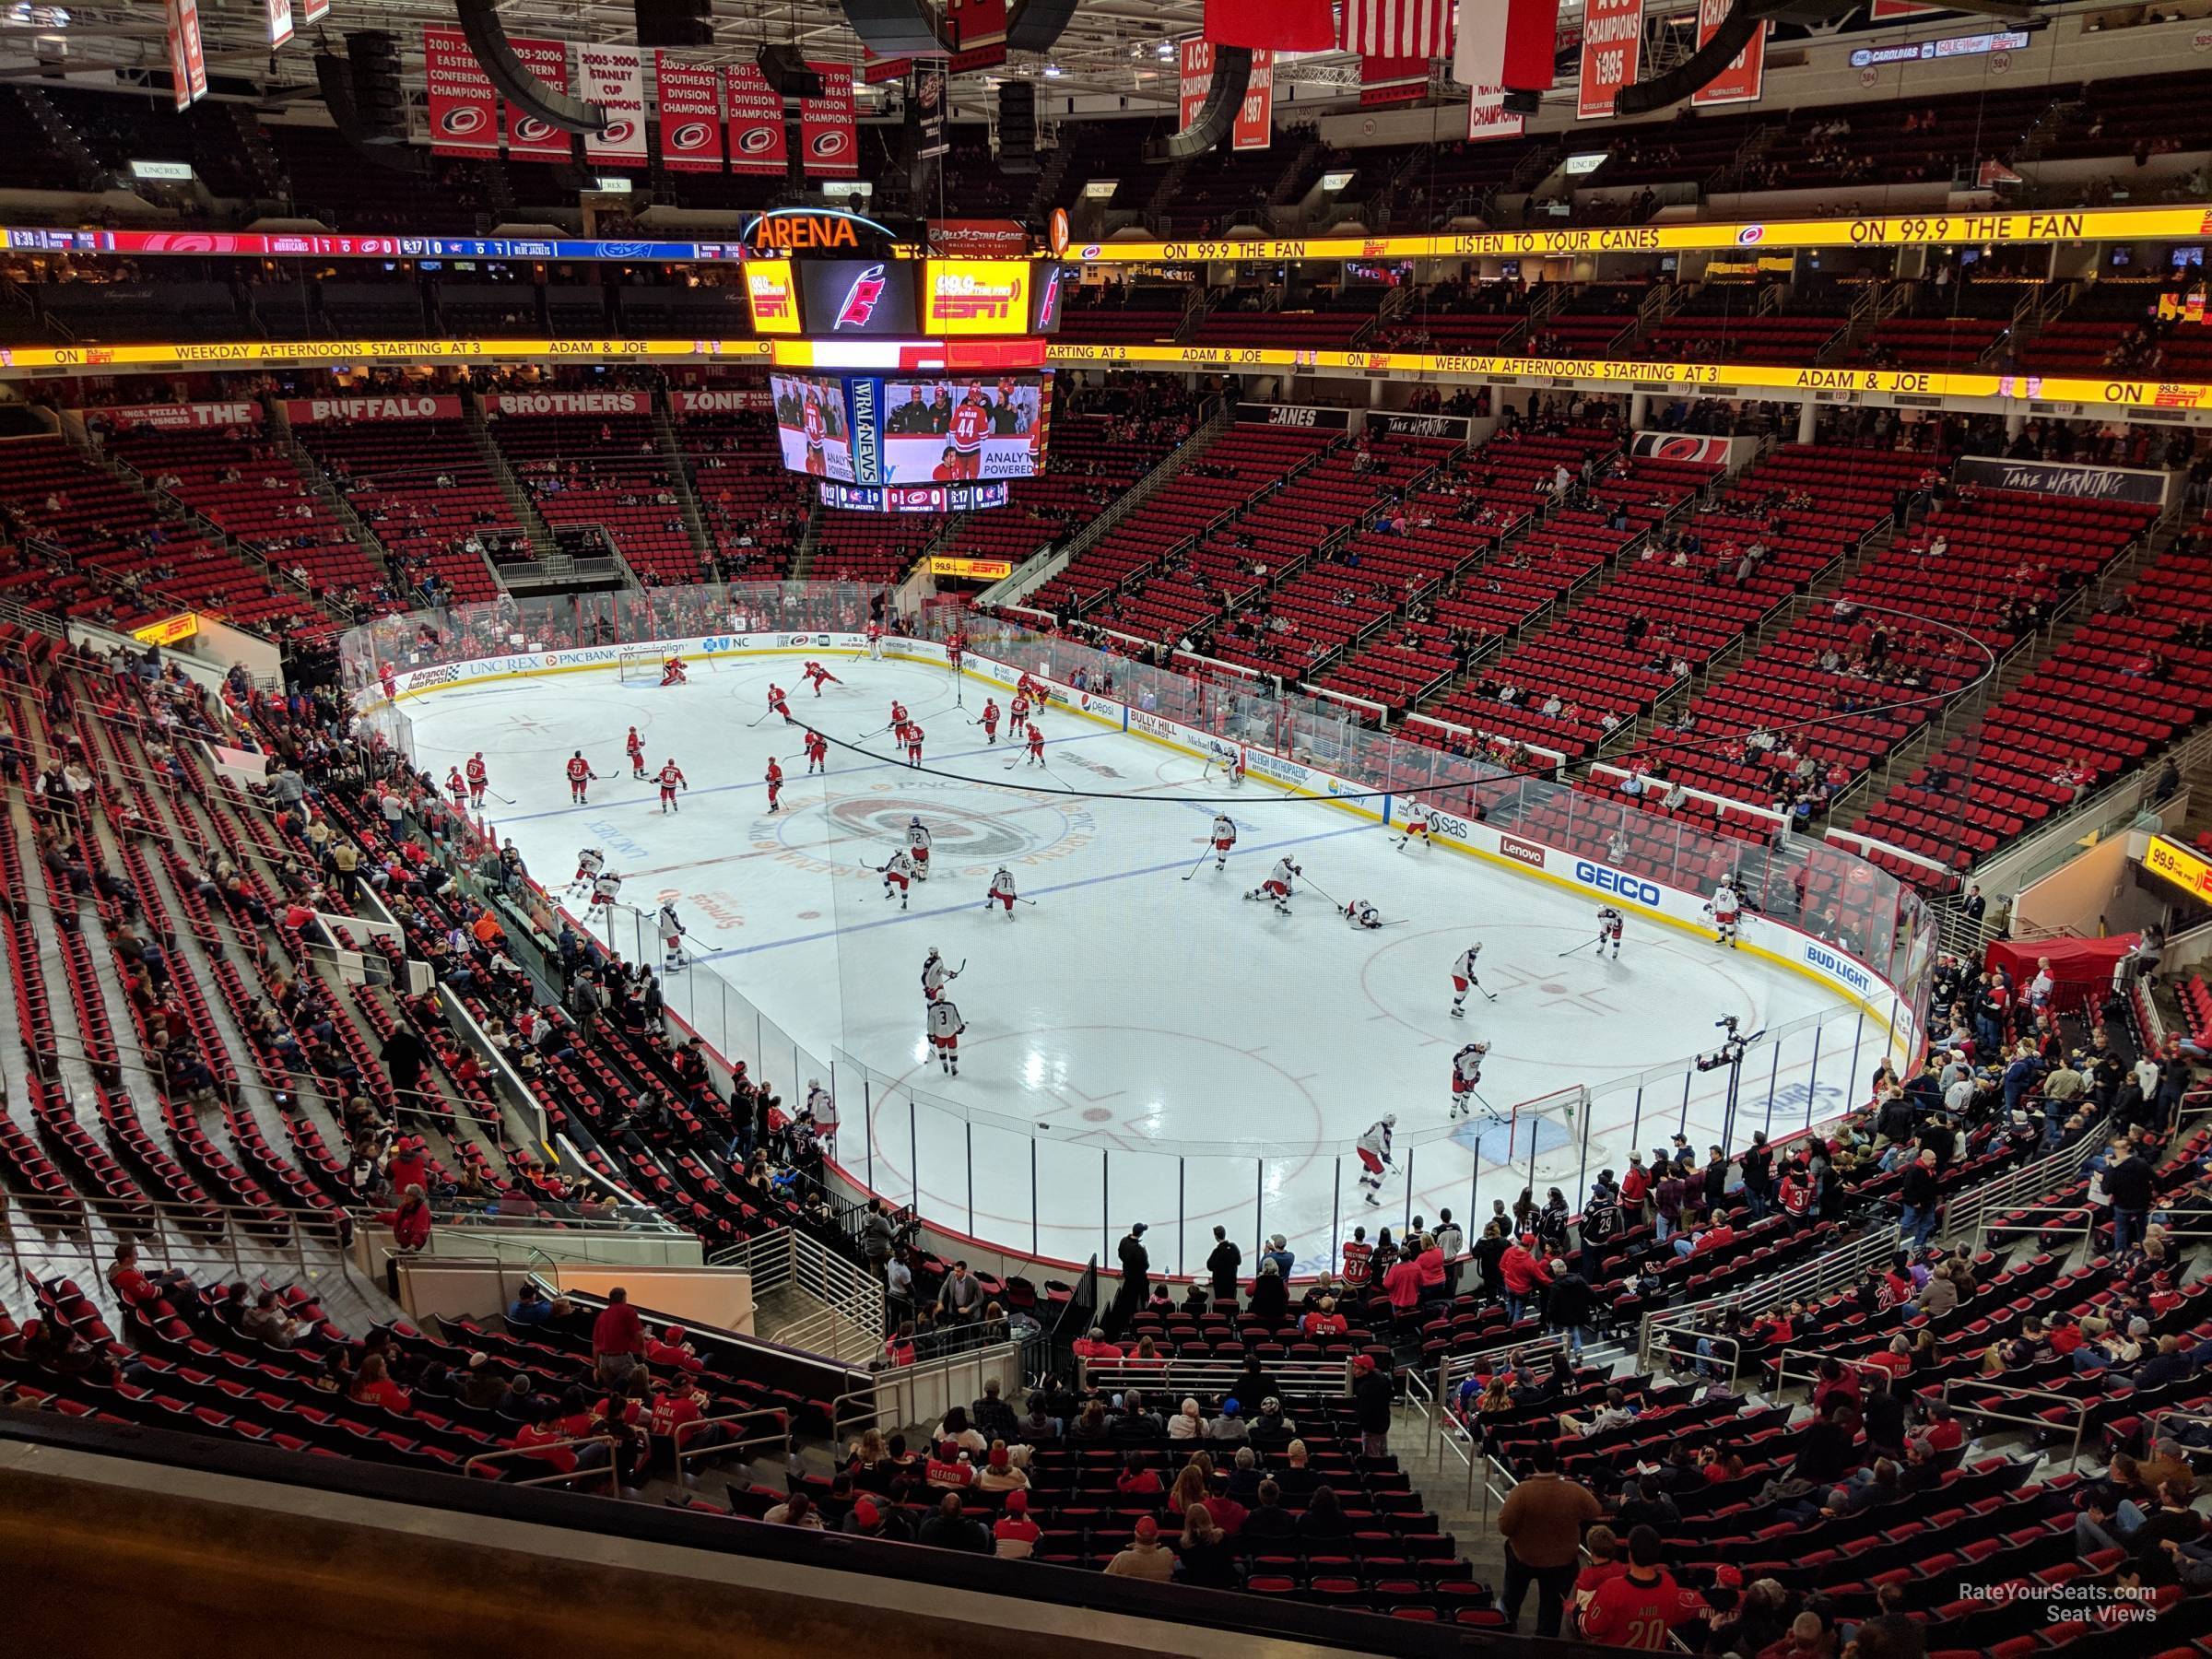 section 229, row d seat view  for hockey - pnc arena